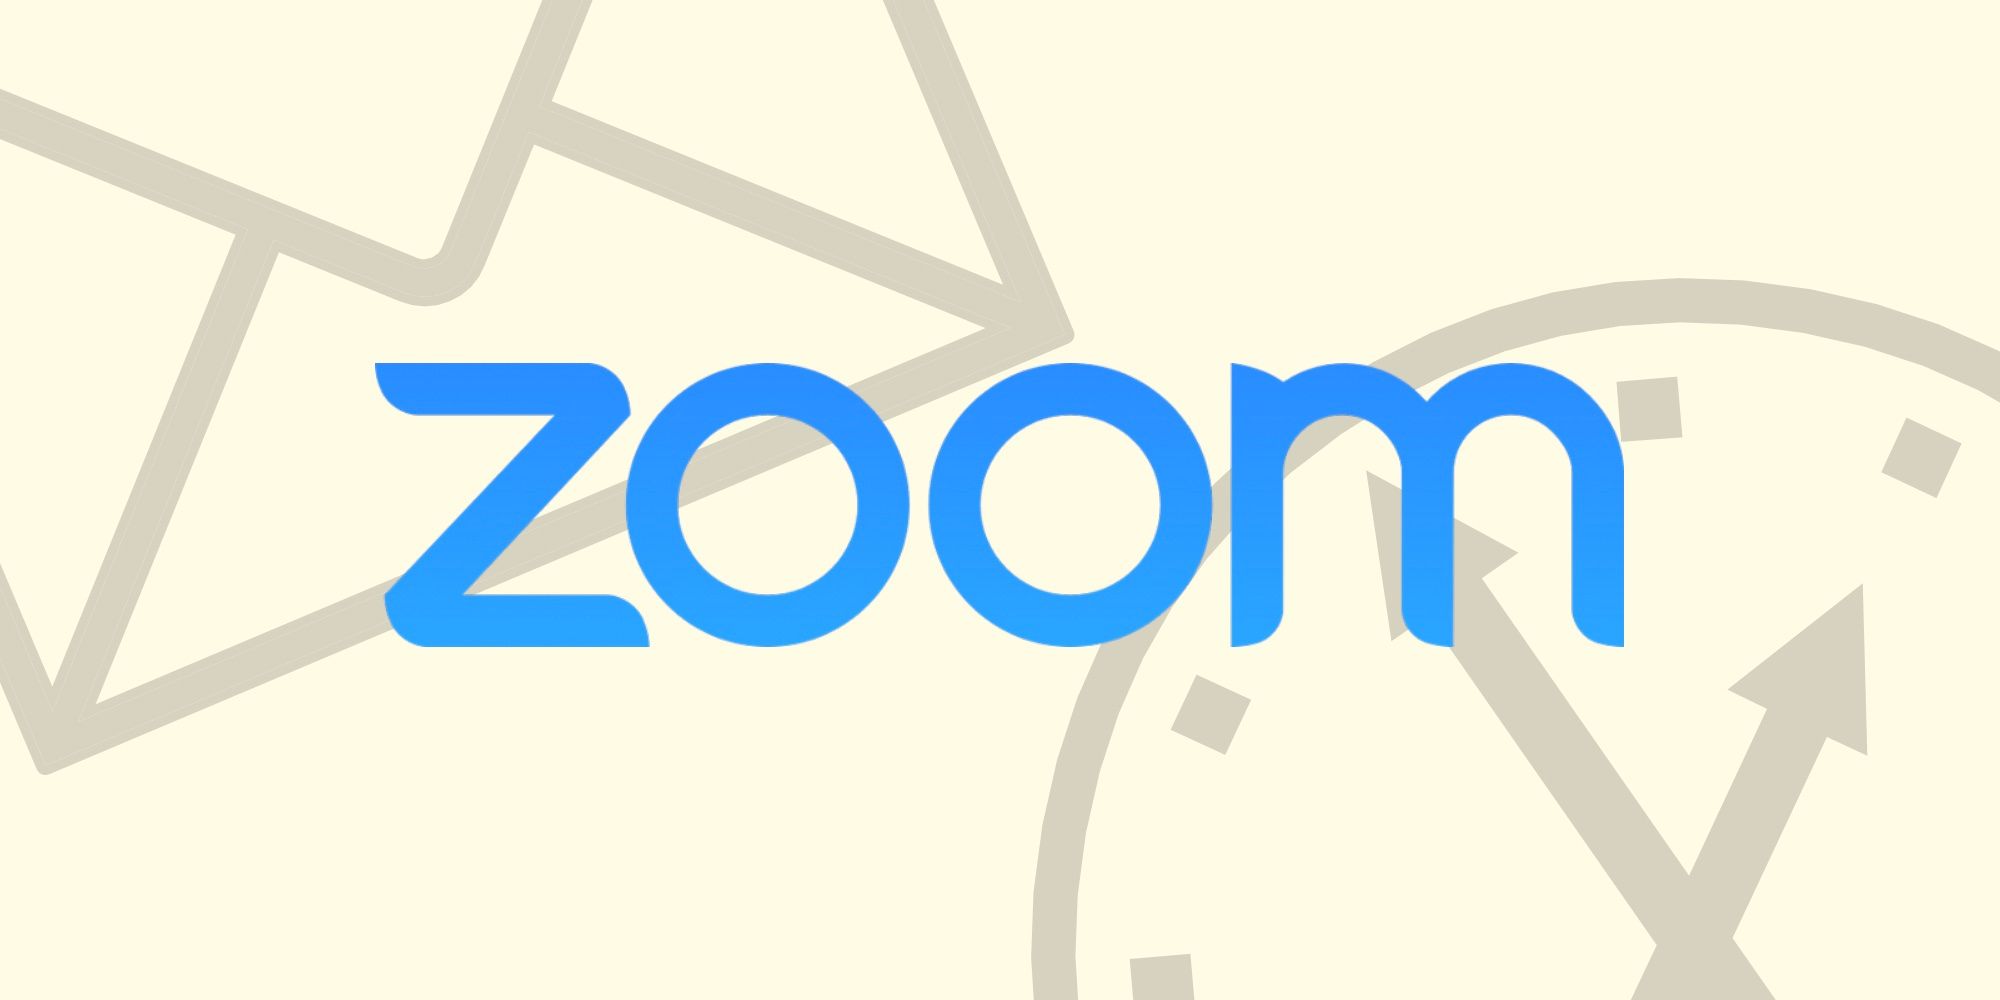 Why Zoom Might Offer Its Own Email Calendar Services Soon